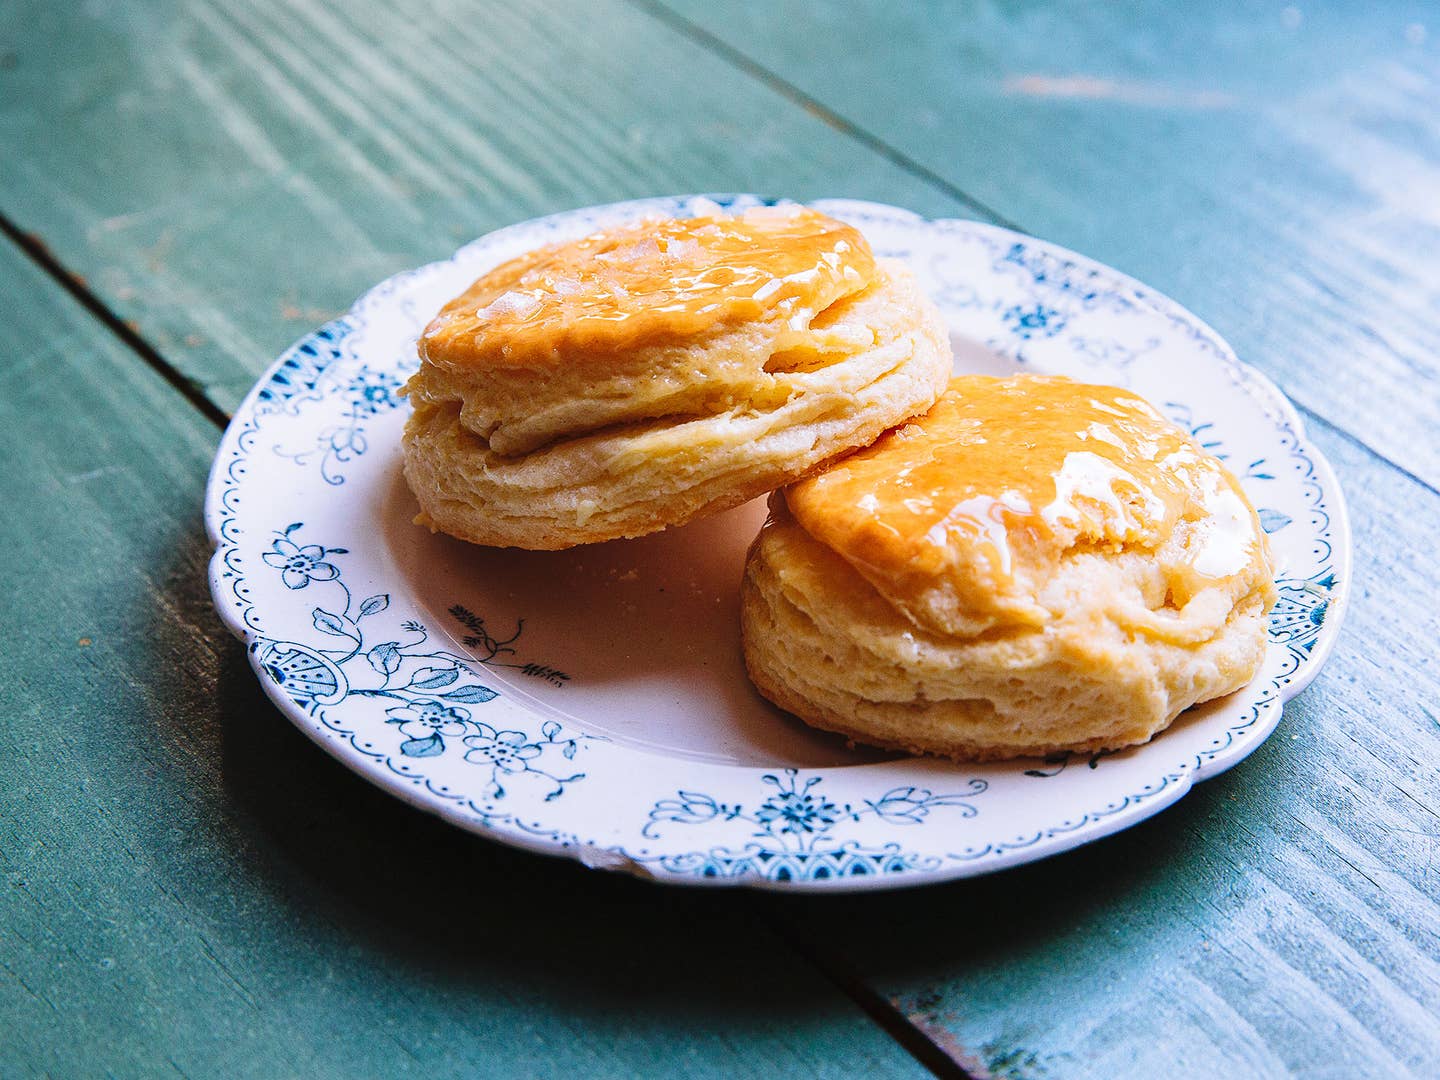 Super-Flaky Buttermilk Biscuits With Honey Butter